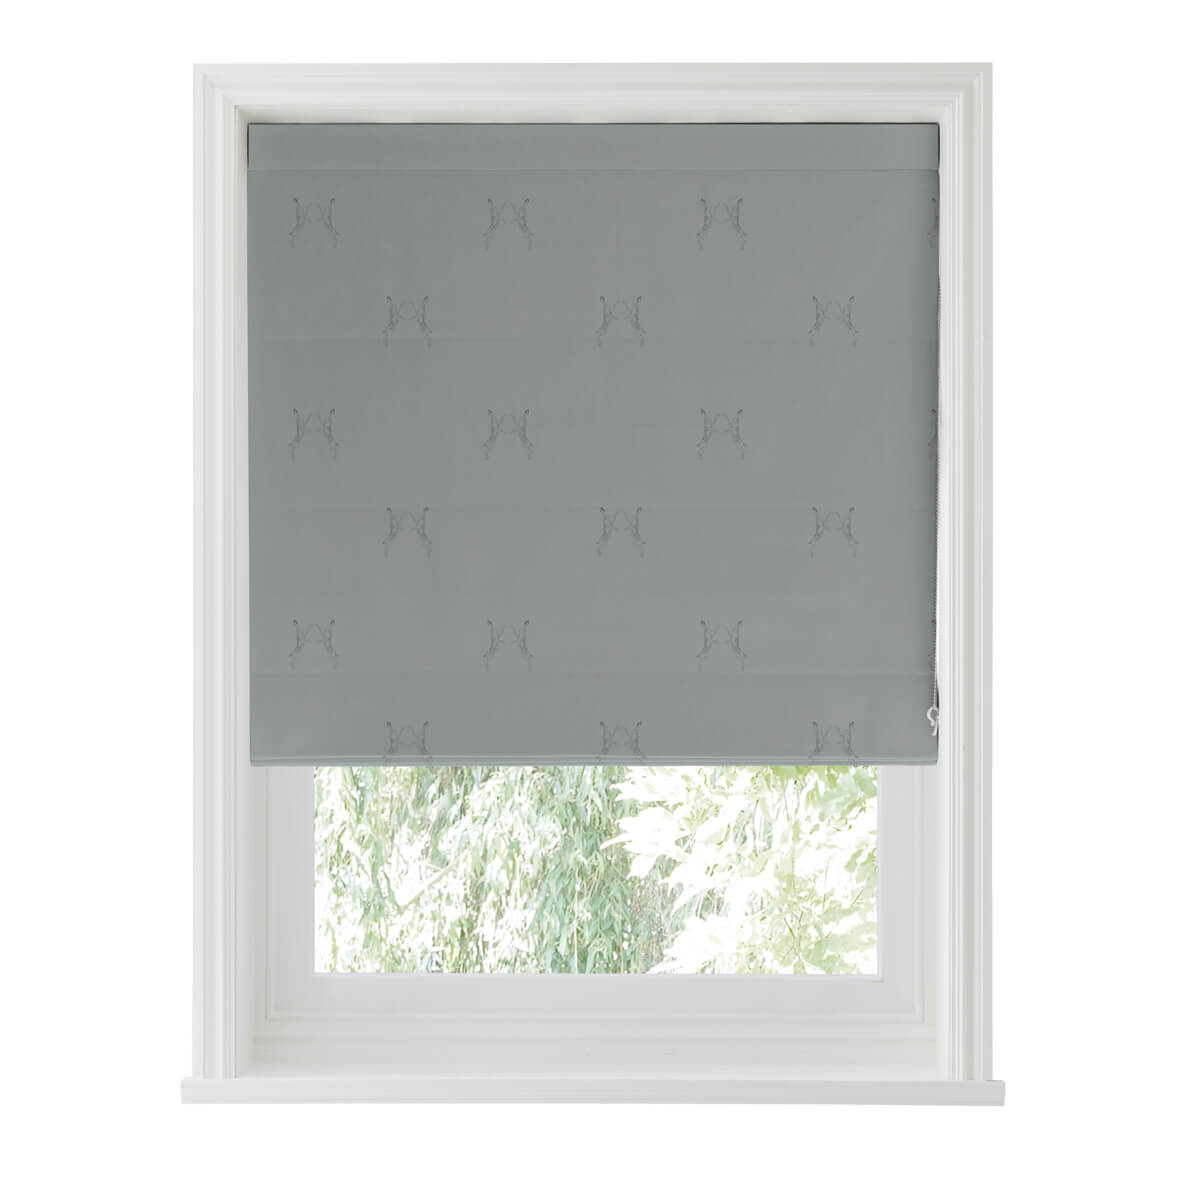 Boxing Hares Deep Duck Egg Made to Measure Roman Blind